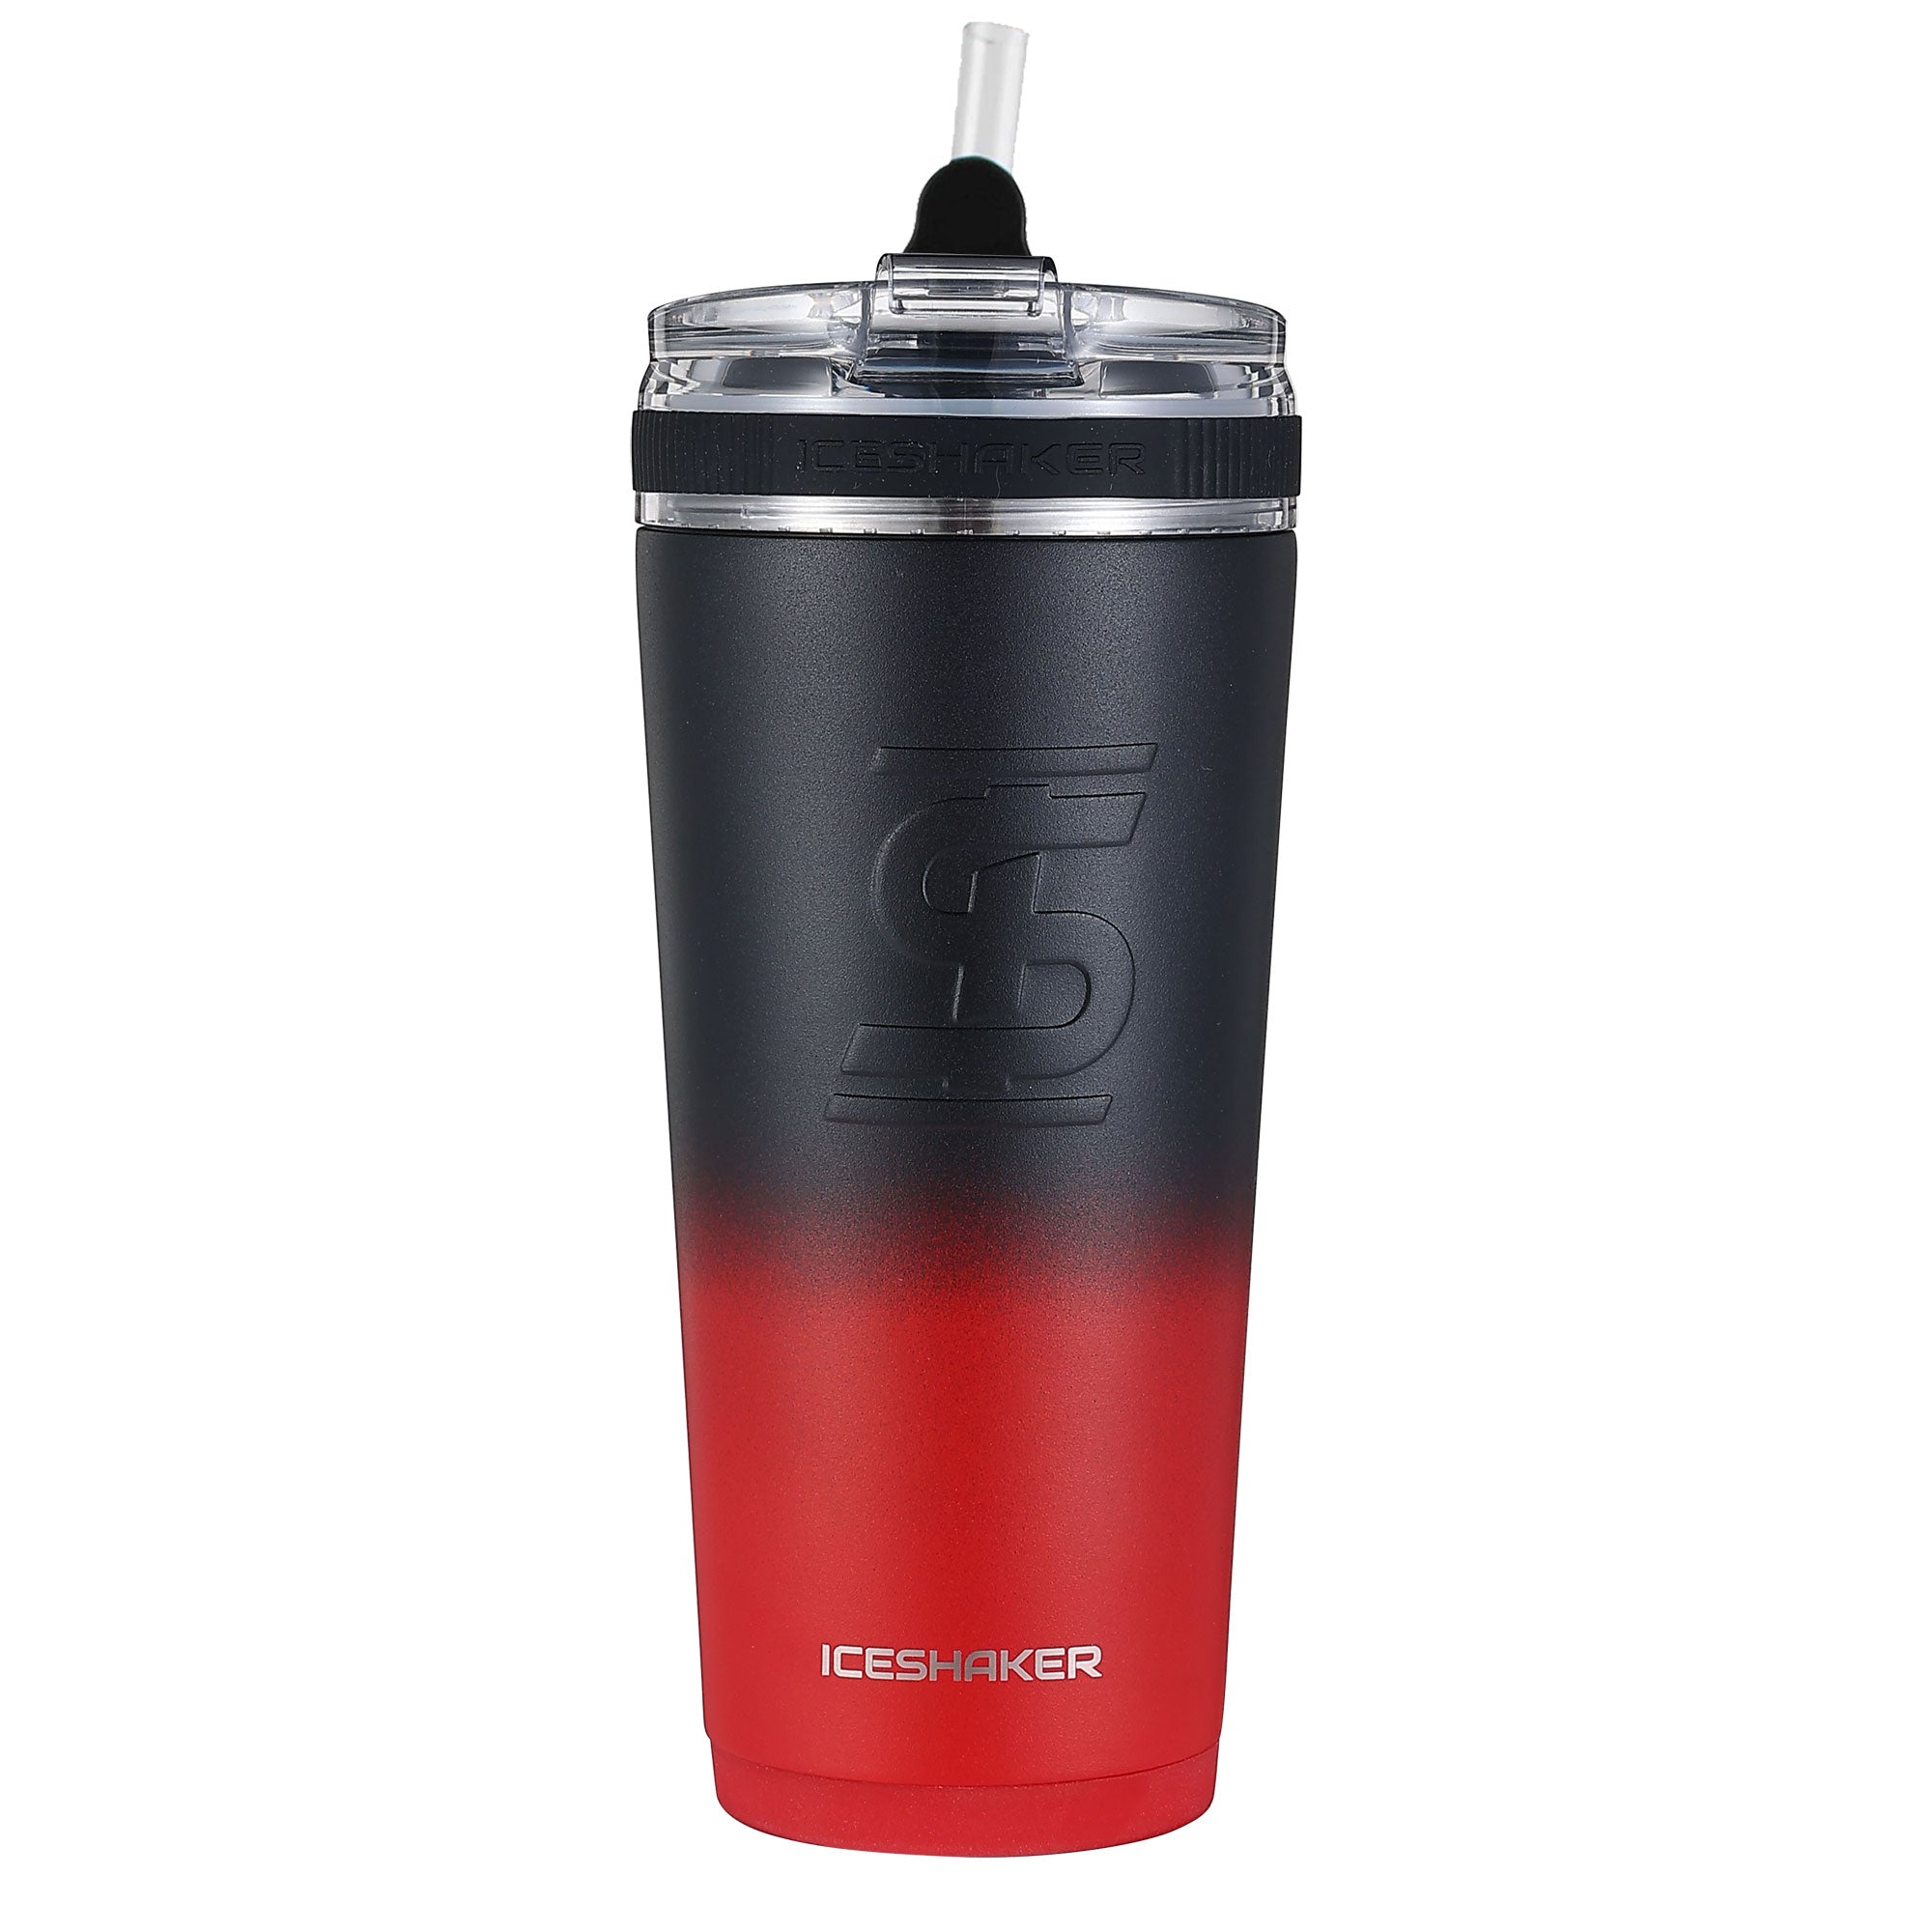 Shop All - Flasks, Tumblers, Shakers, & More